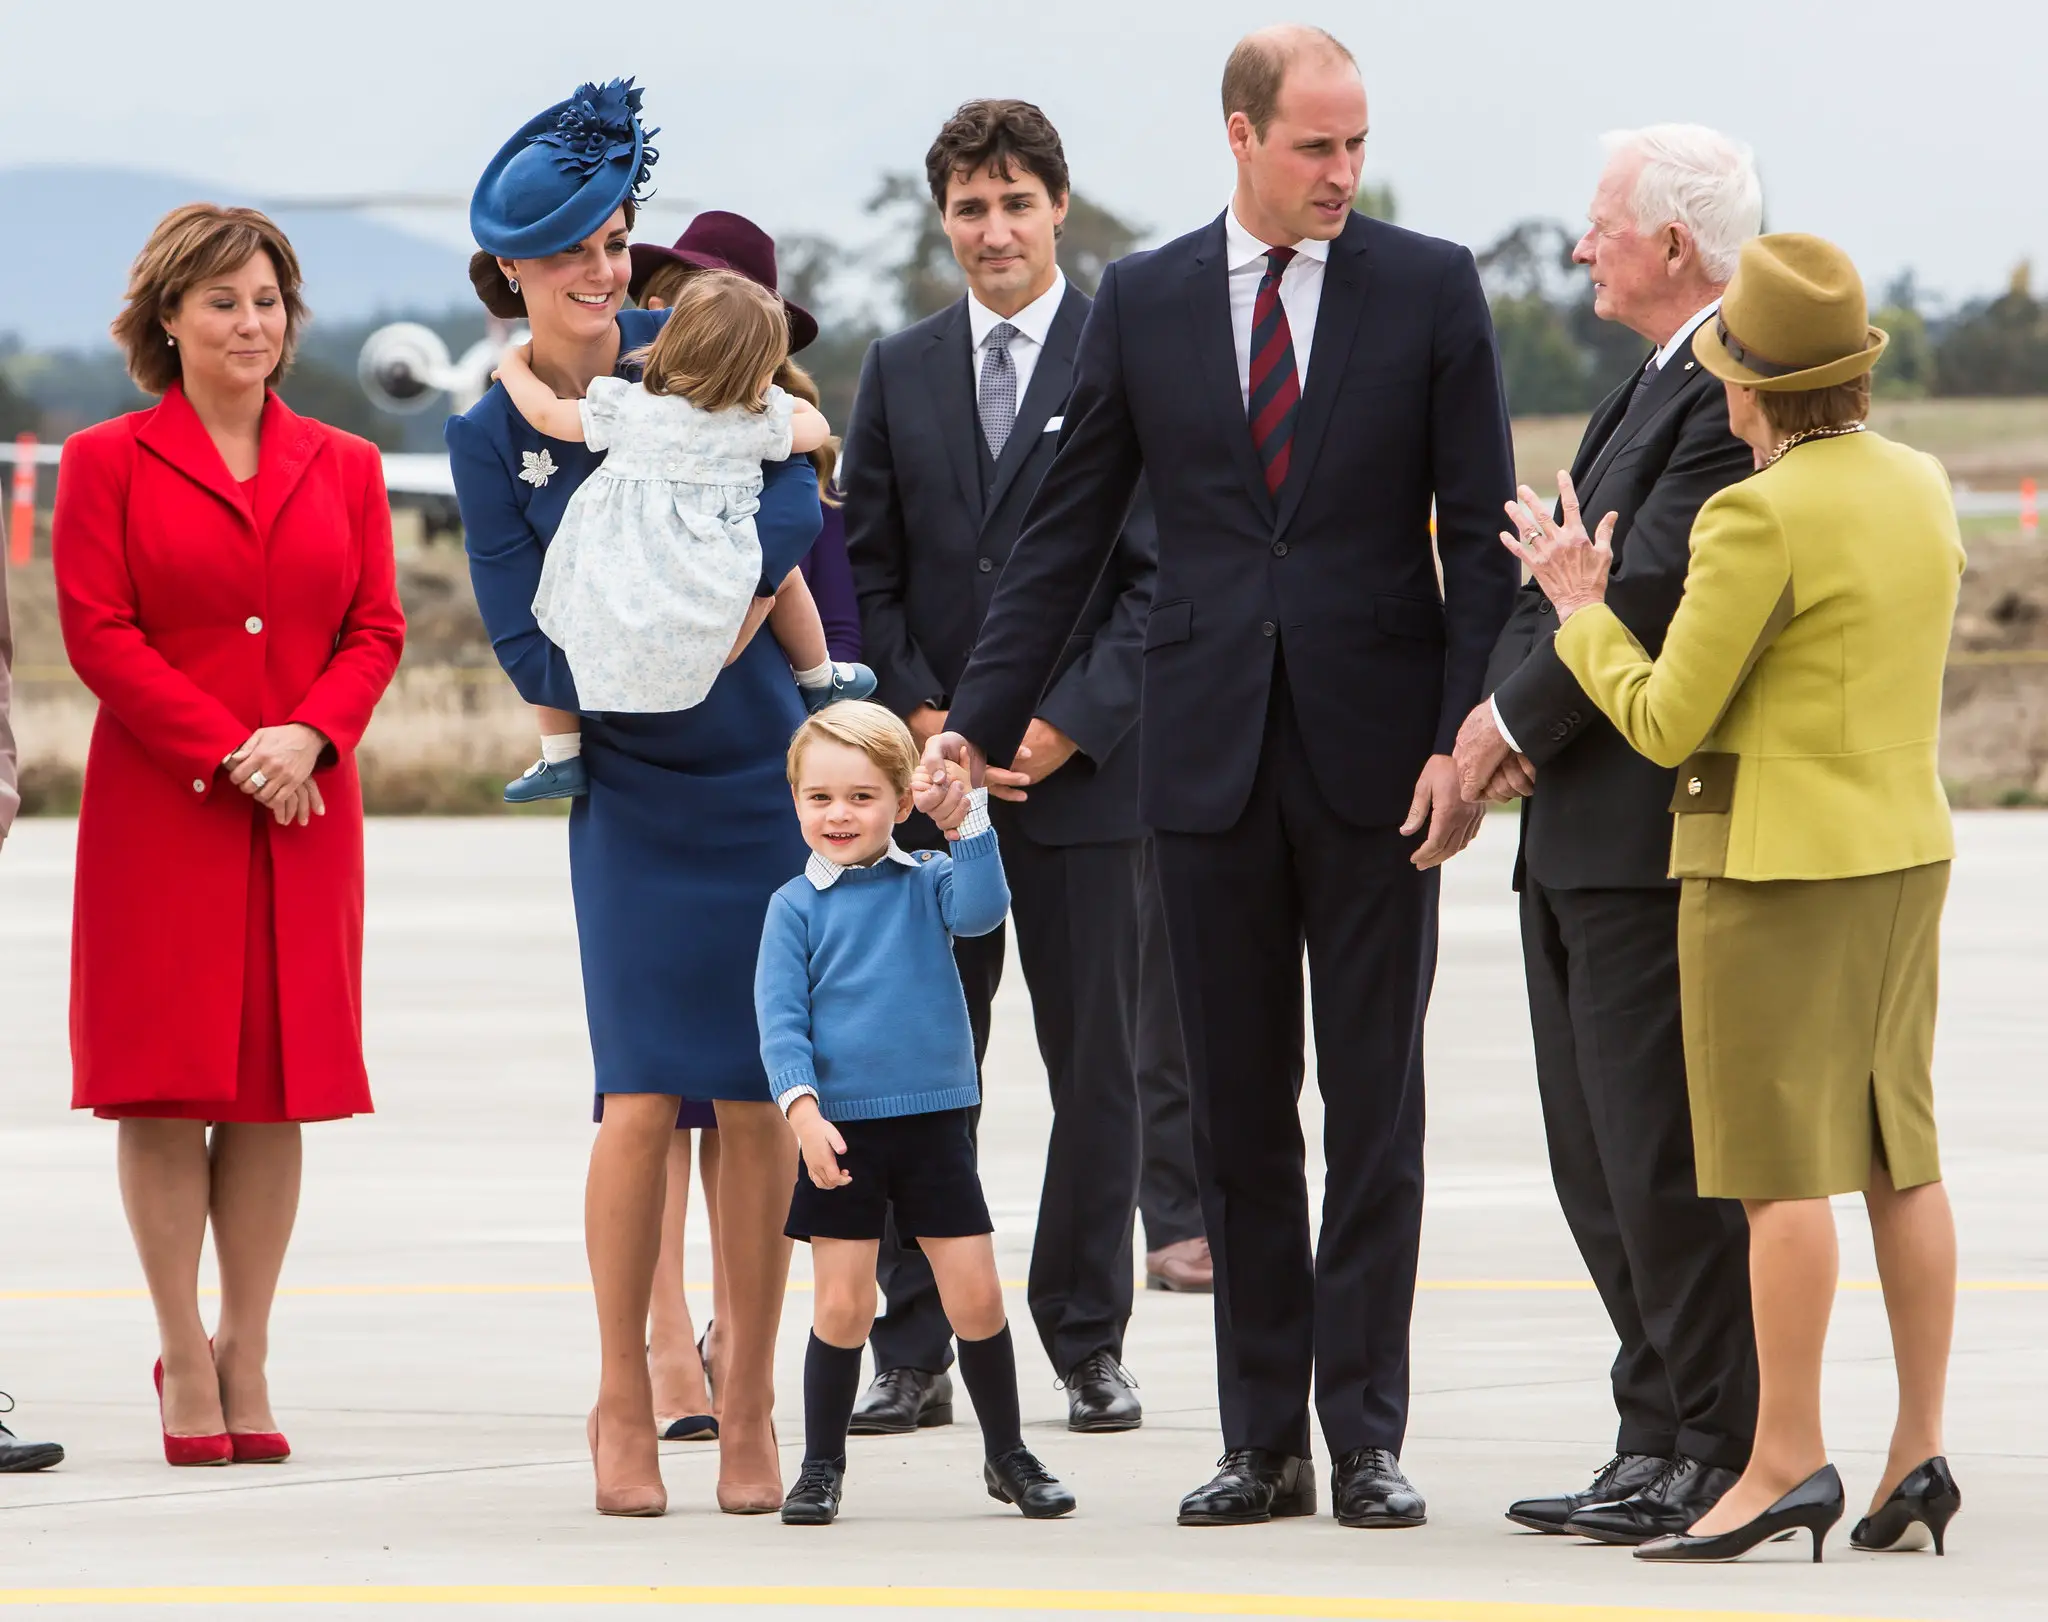 The Royal Welcome in Canada